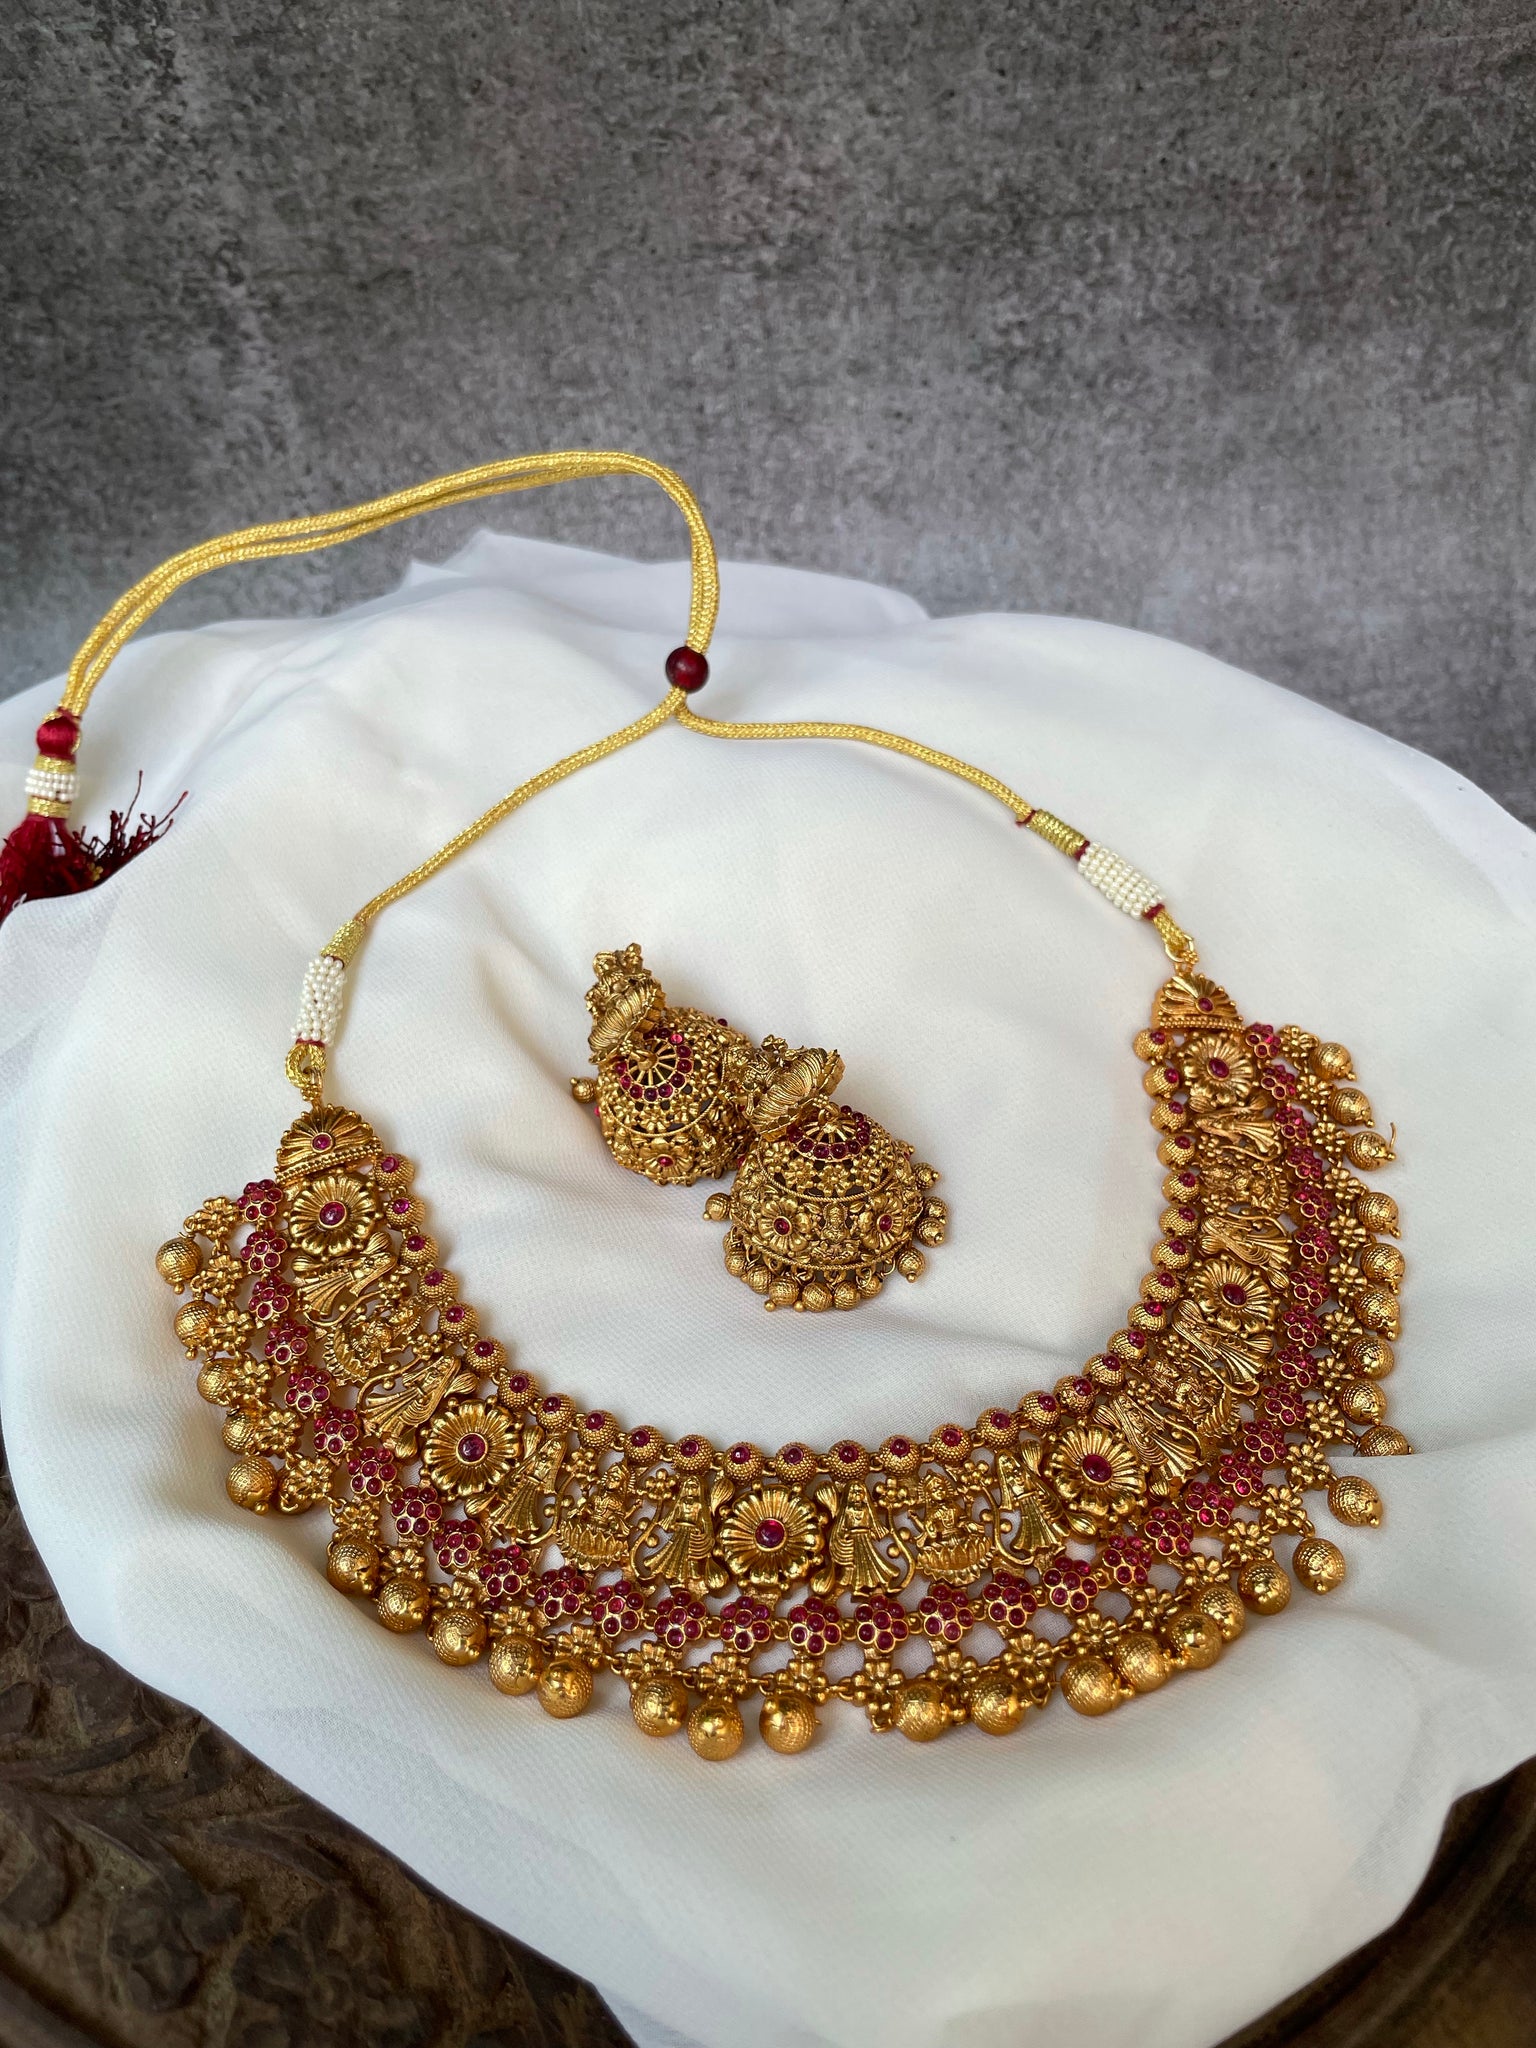 Lakshmi nrithya ruby necklace with Jhumkas